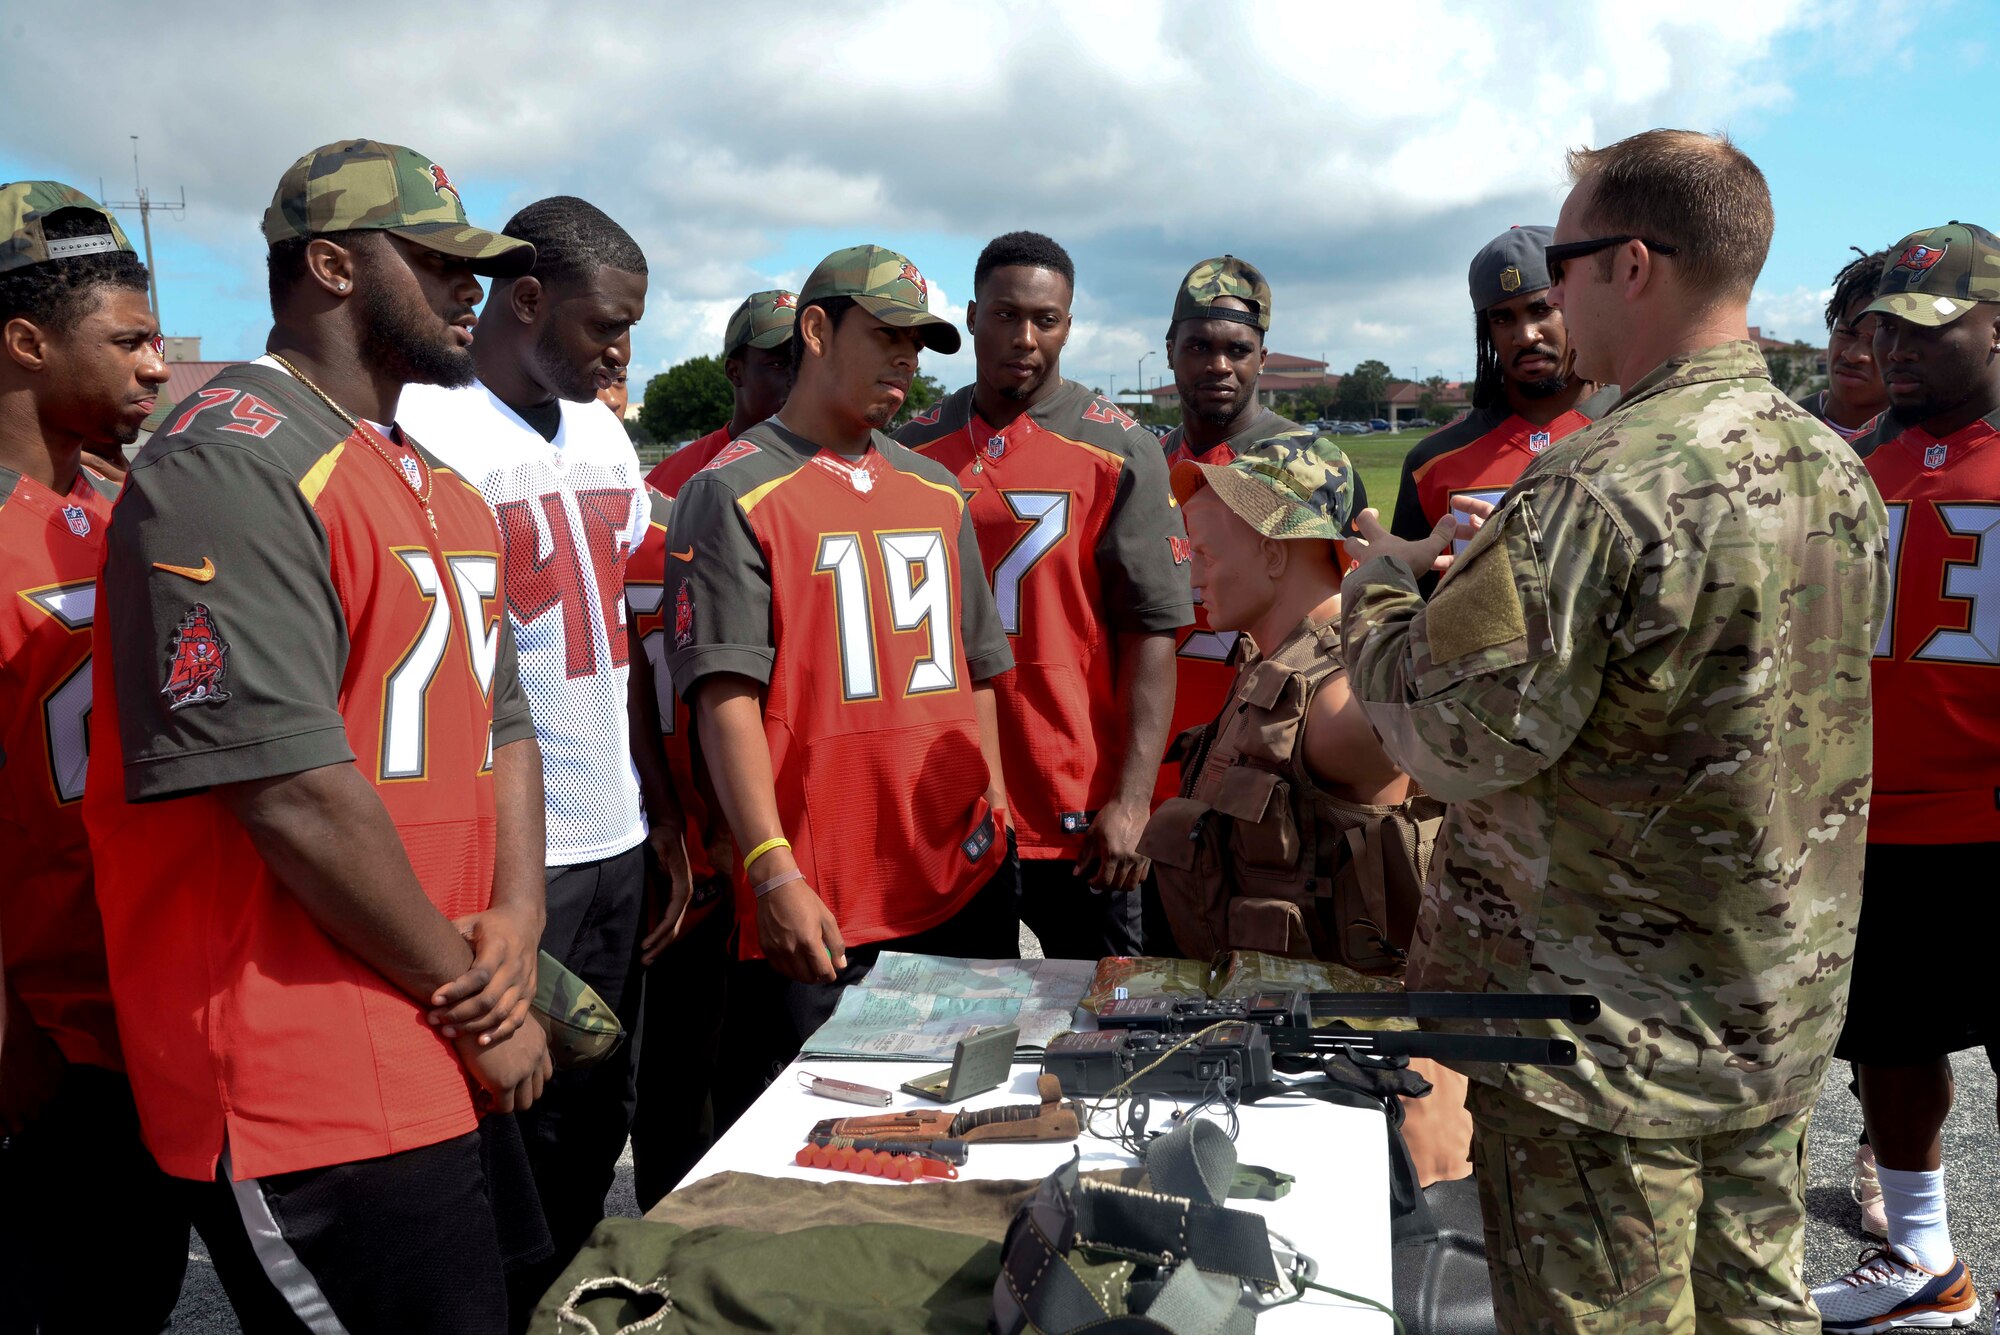 (Right) Staff Sgt. Benjamin Heard, Survival, Evasion, Resistance and Escape specialist, explains the use of survival tools to rookies of the Tampa Bay Buccaneers at MacDill Air Force Base, Fla. June 10, 2016. The rookies received the opportunity to test equipment, learn basic survival skills and sample food rations. 